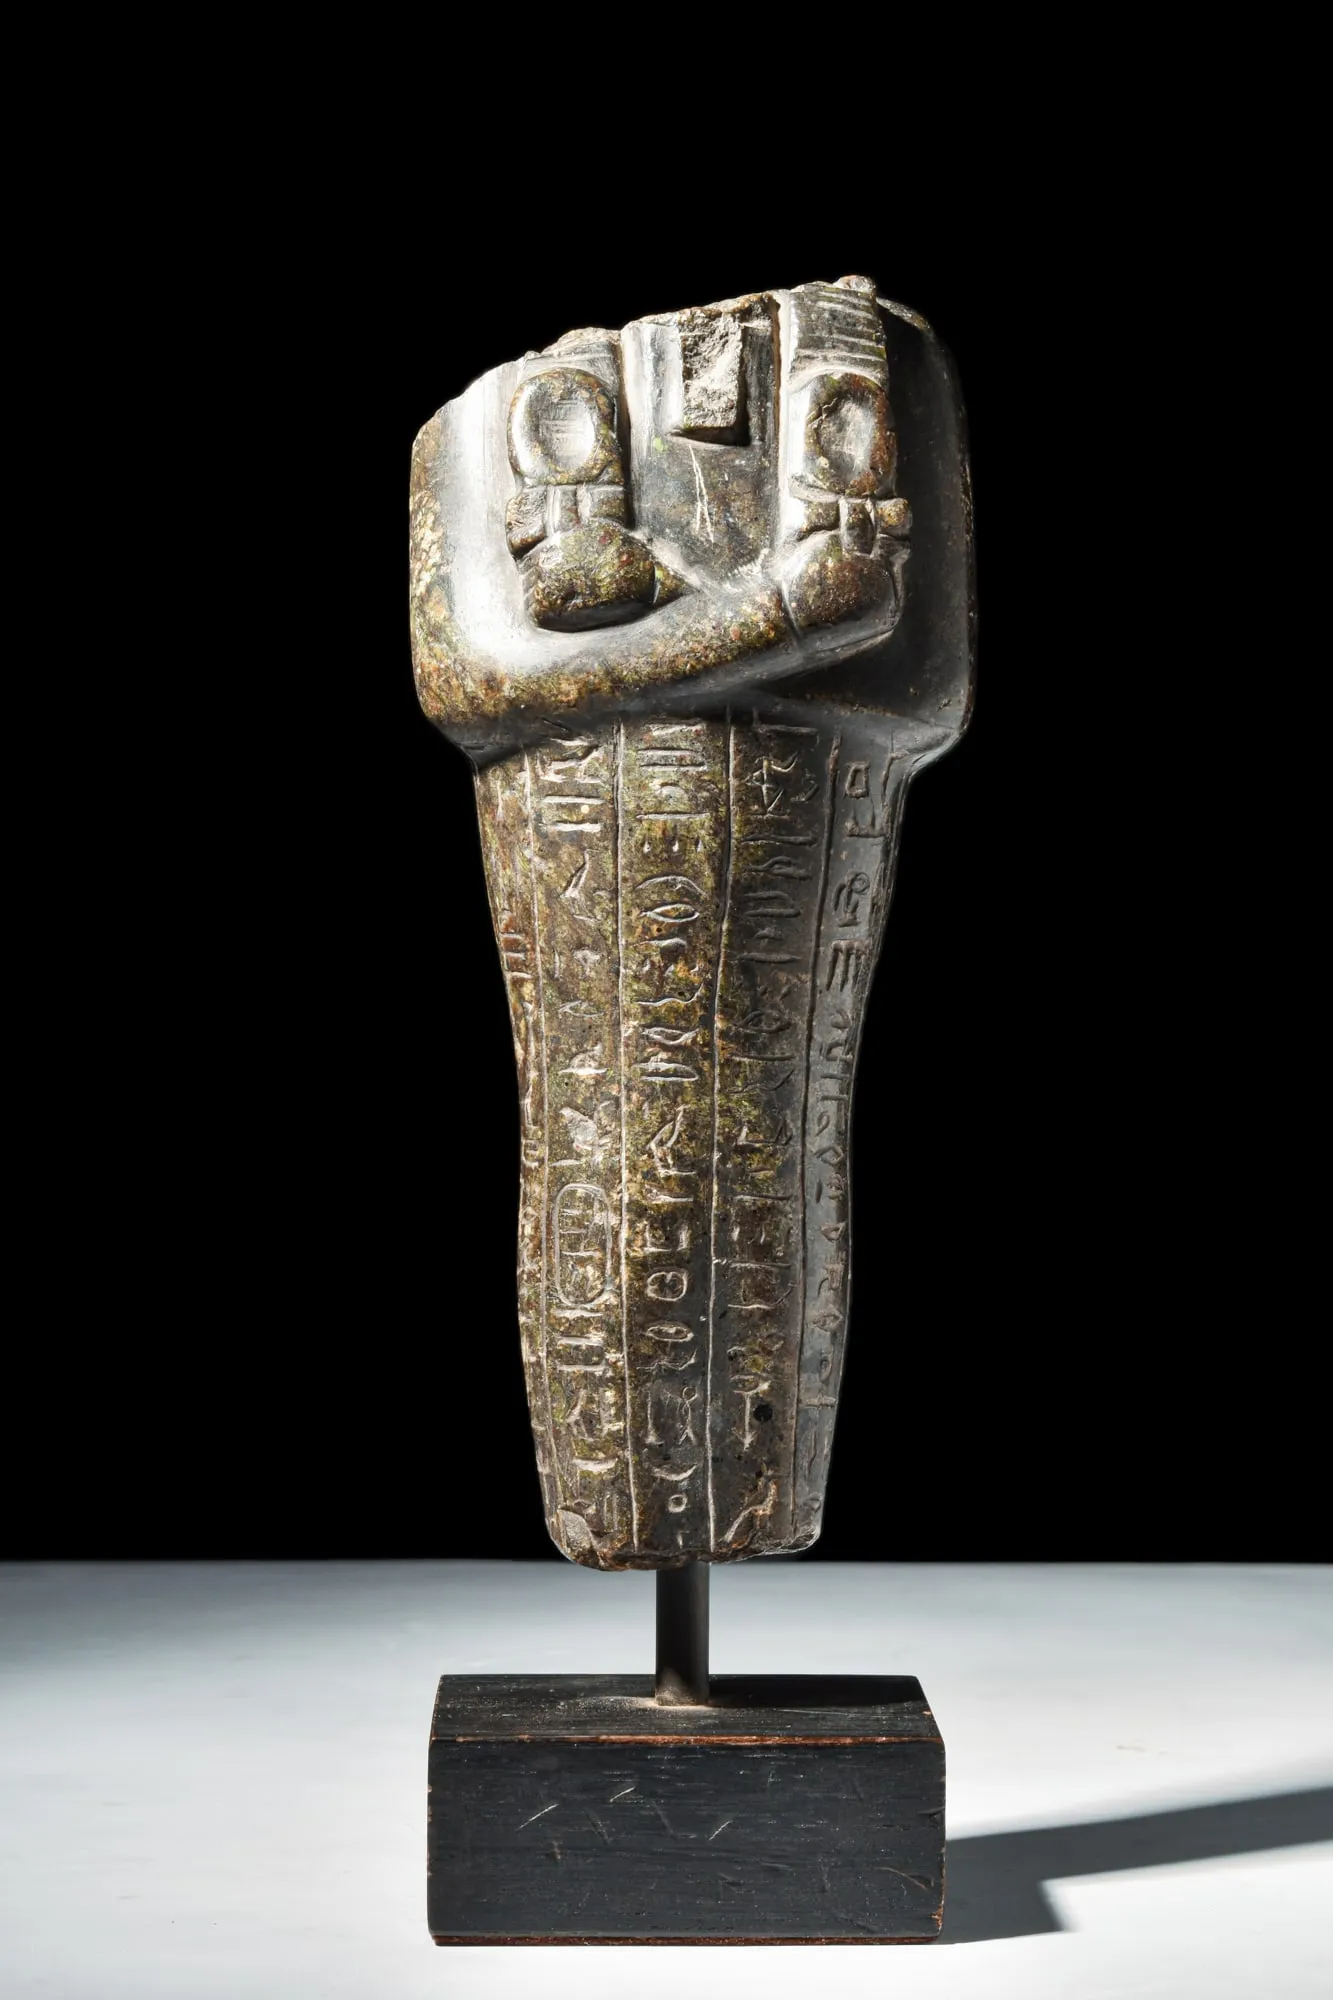 Fragmentary ushabti made for Amenhotep III, which sold for £17,000 (£21,250 or $26,950 with buyer’s premium) at Apollo Art Auctions.